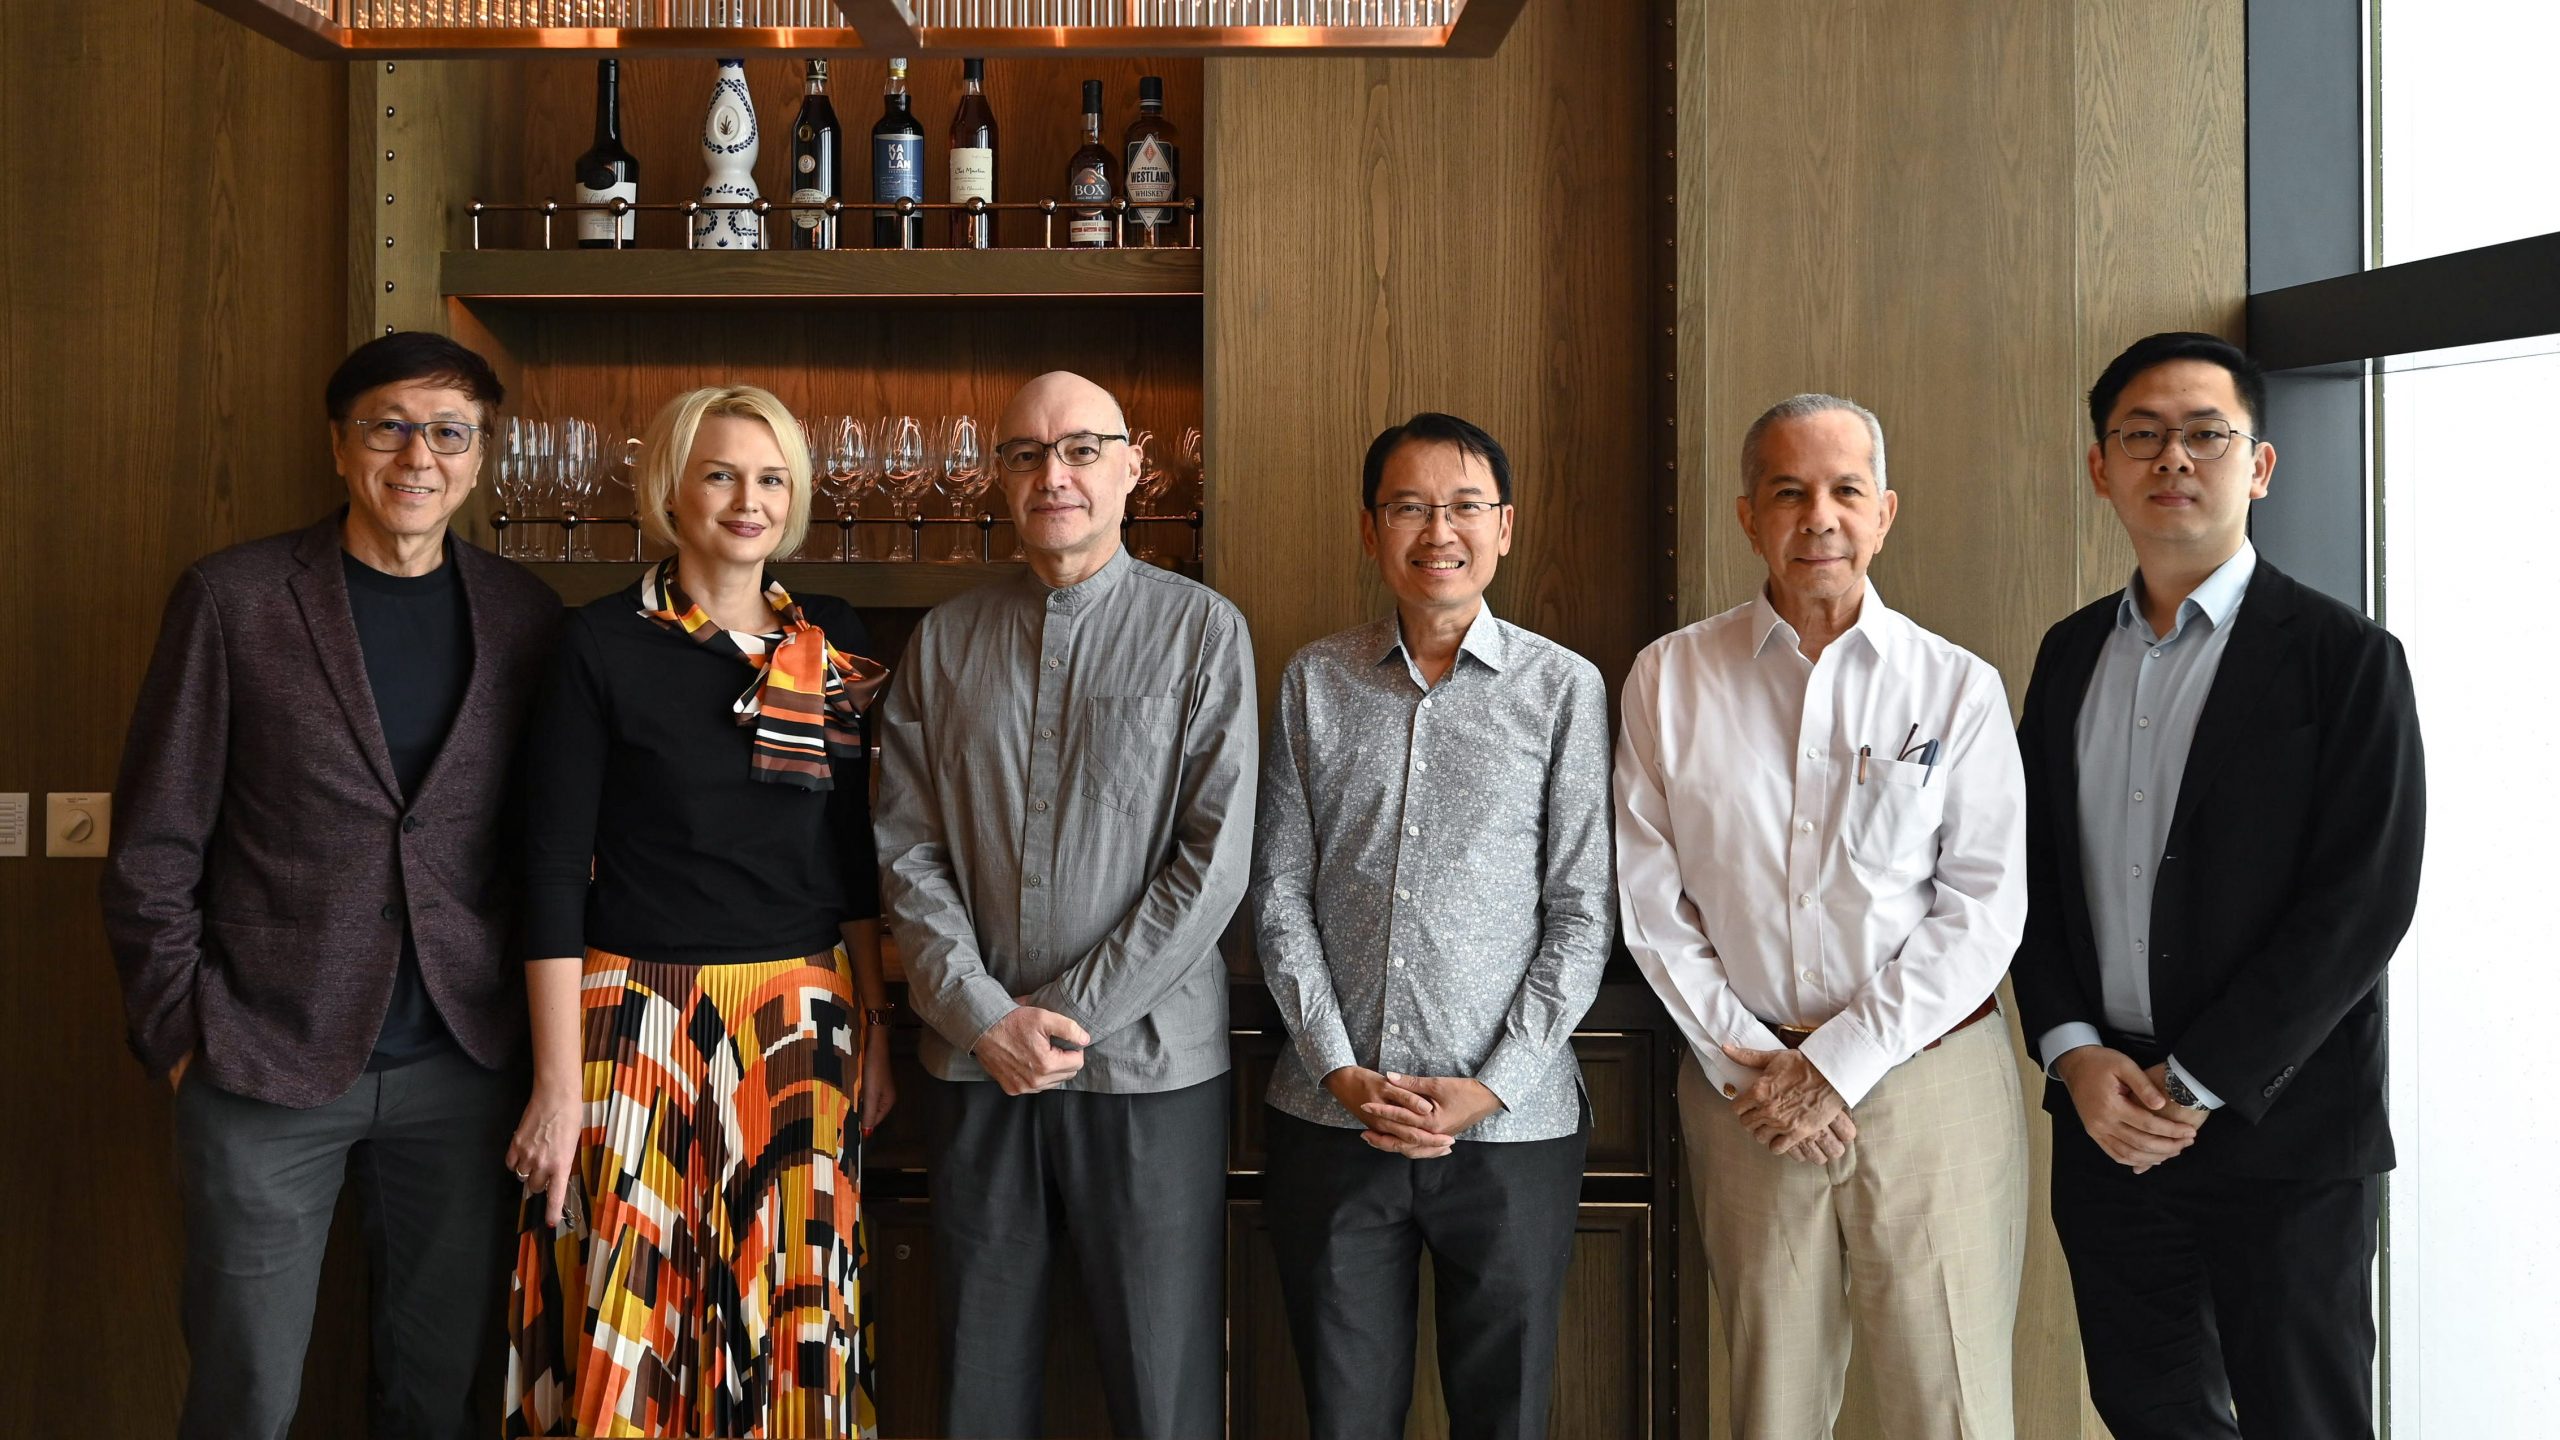 Left to right: MM2 CEO Long Jong Chang; the Ukrainian head of mission, HE Kateryna Zelenko; DNA Senior Editorial Advisor Rodrigo Chiari; Gardens by the Bay CEO Felix Log; Sebastian Quirós Fernandez, who is the marine director of the Marine Technical Department at the Panamanian embassy in Singapore; and Ascott International Management Assistant Sales Manager Elwen Poon. 